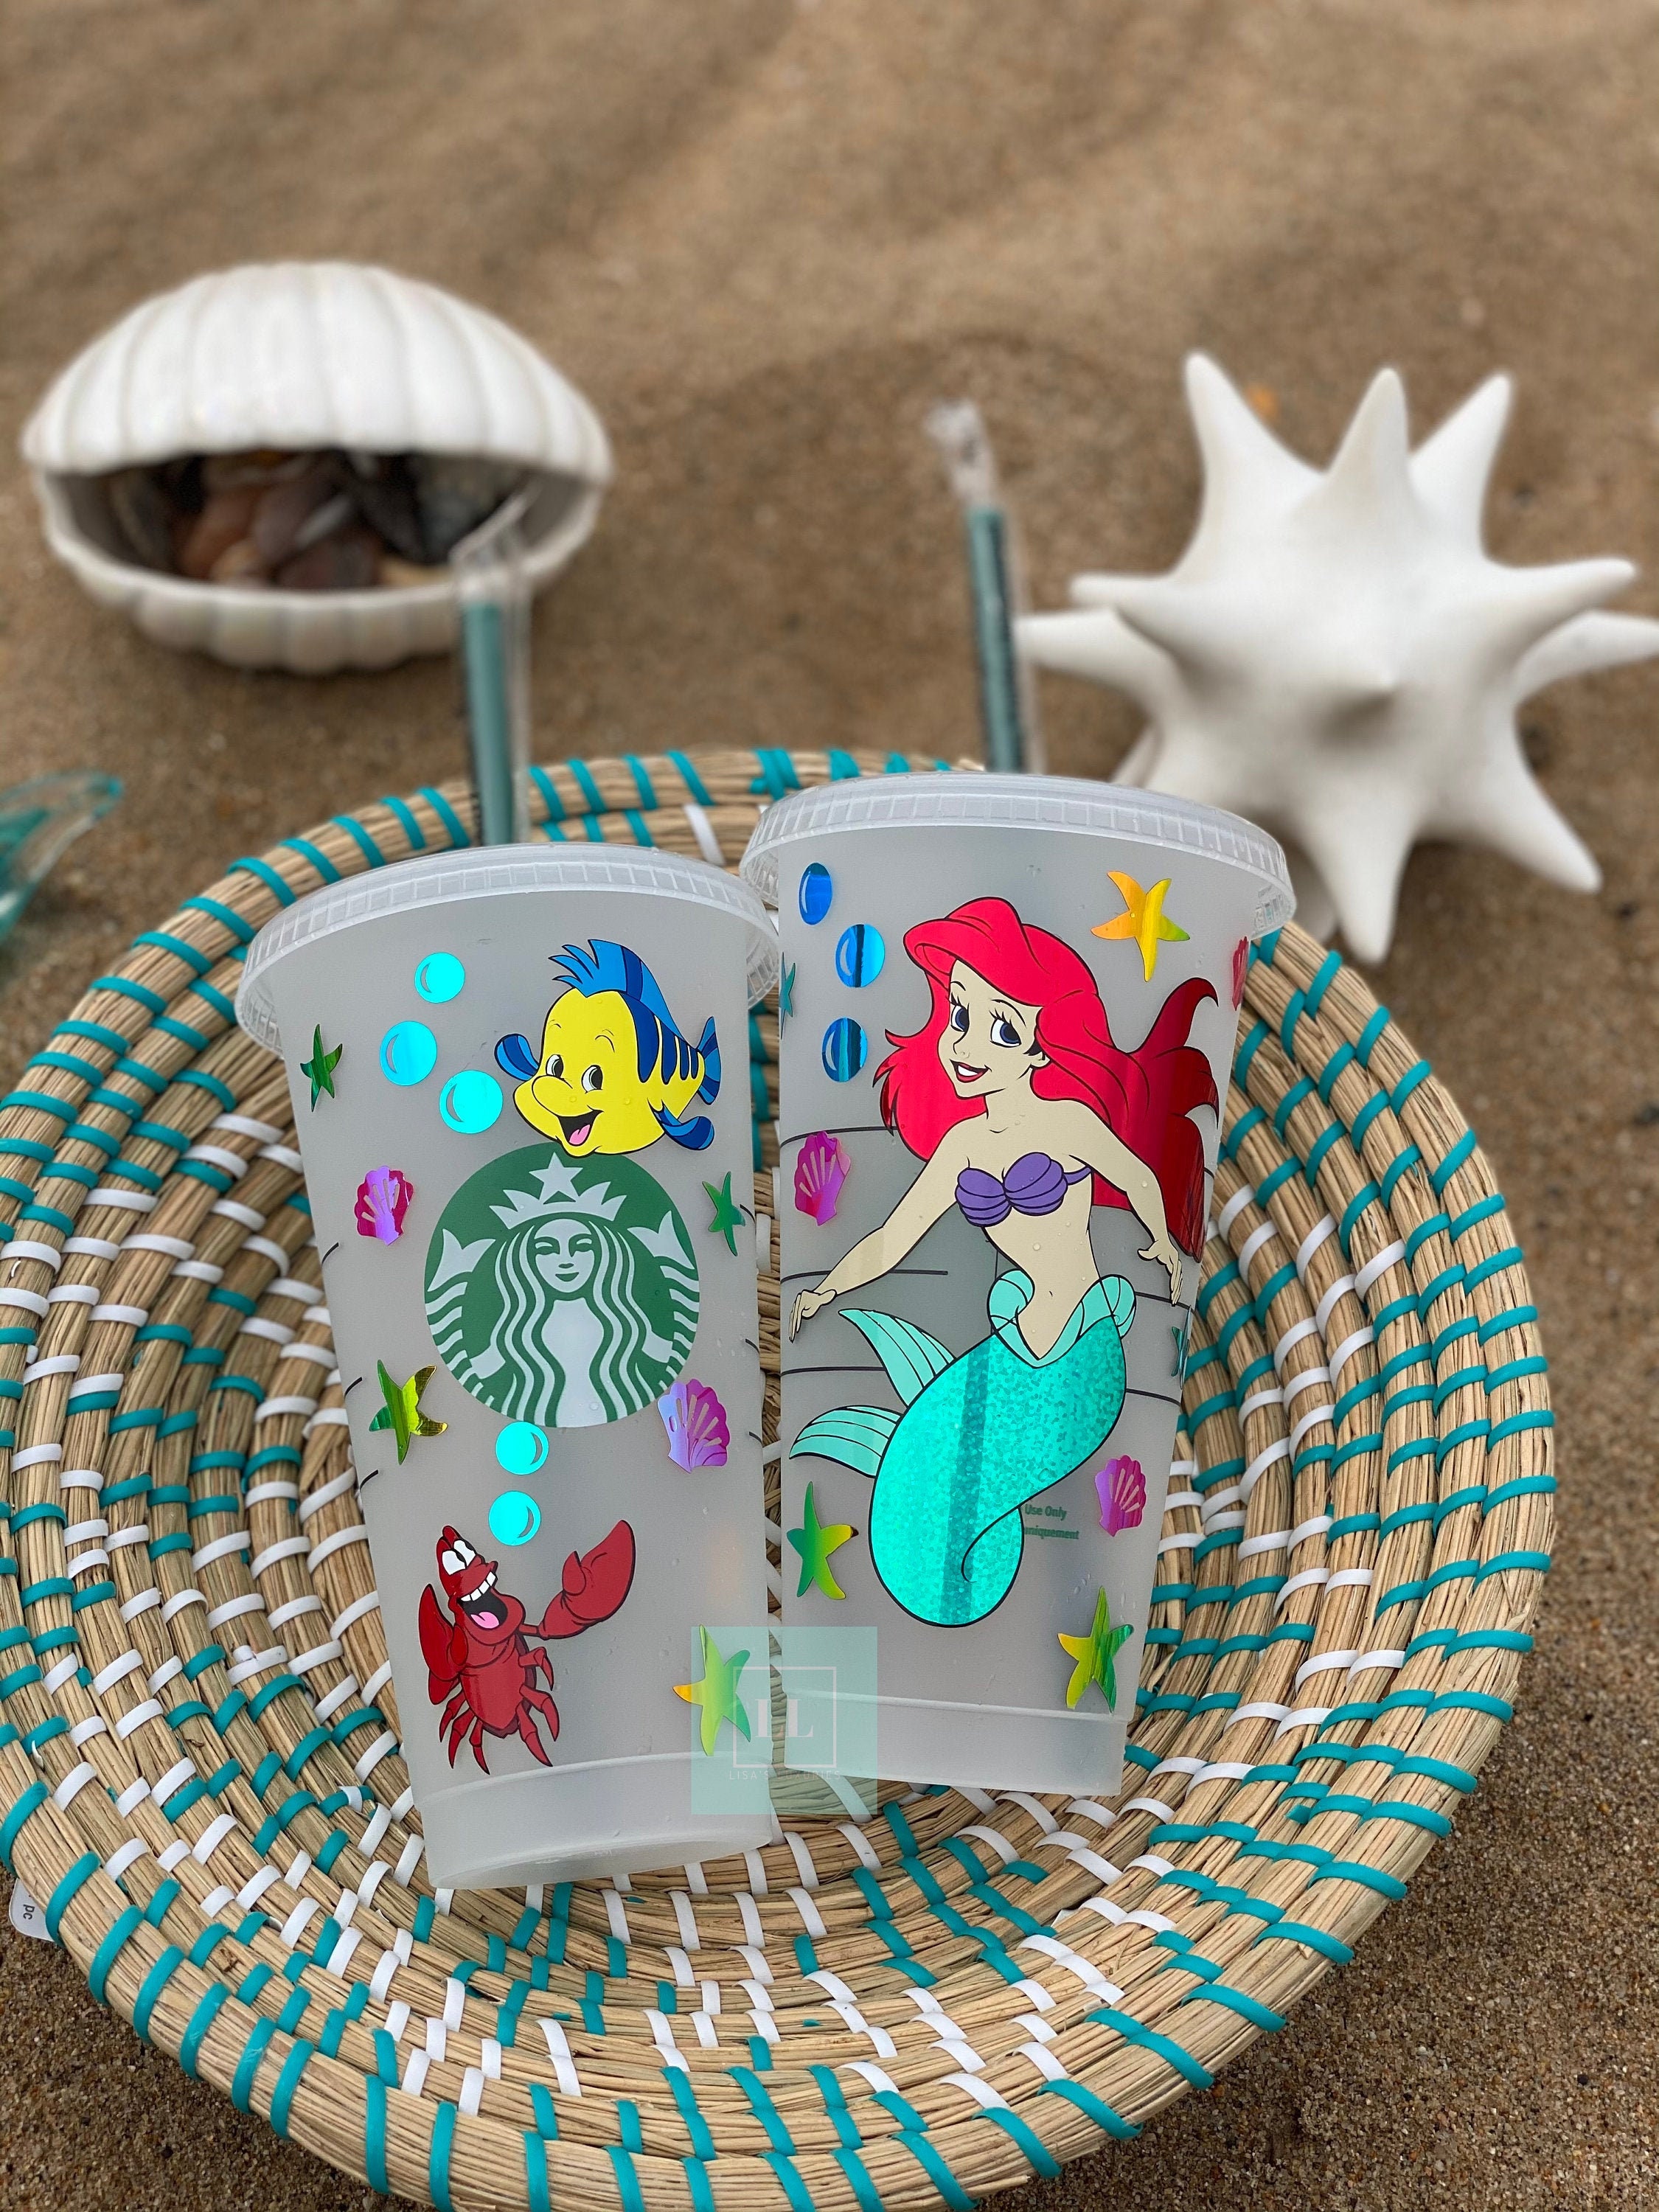 Zak Designs The Little Mermaid 18 oz. Plastic Tumbler with Straw and  Sculpted Lid, Ariel 